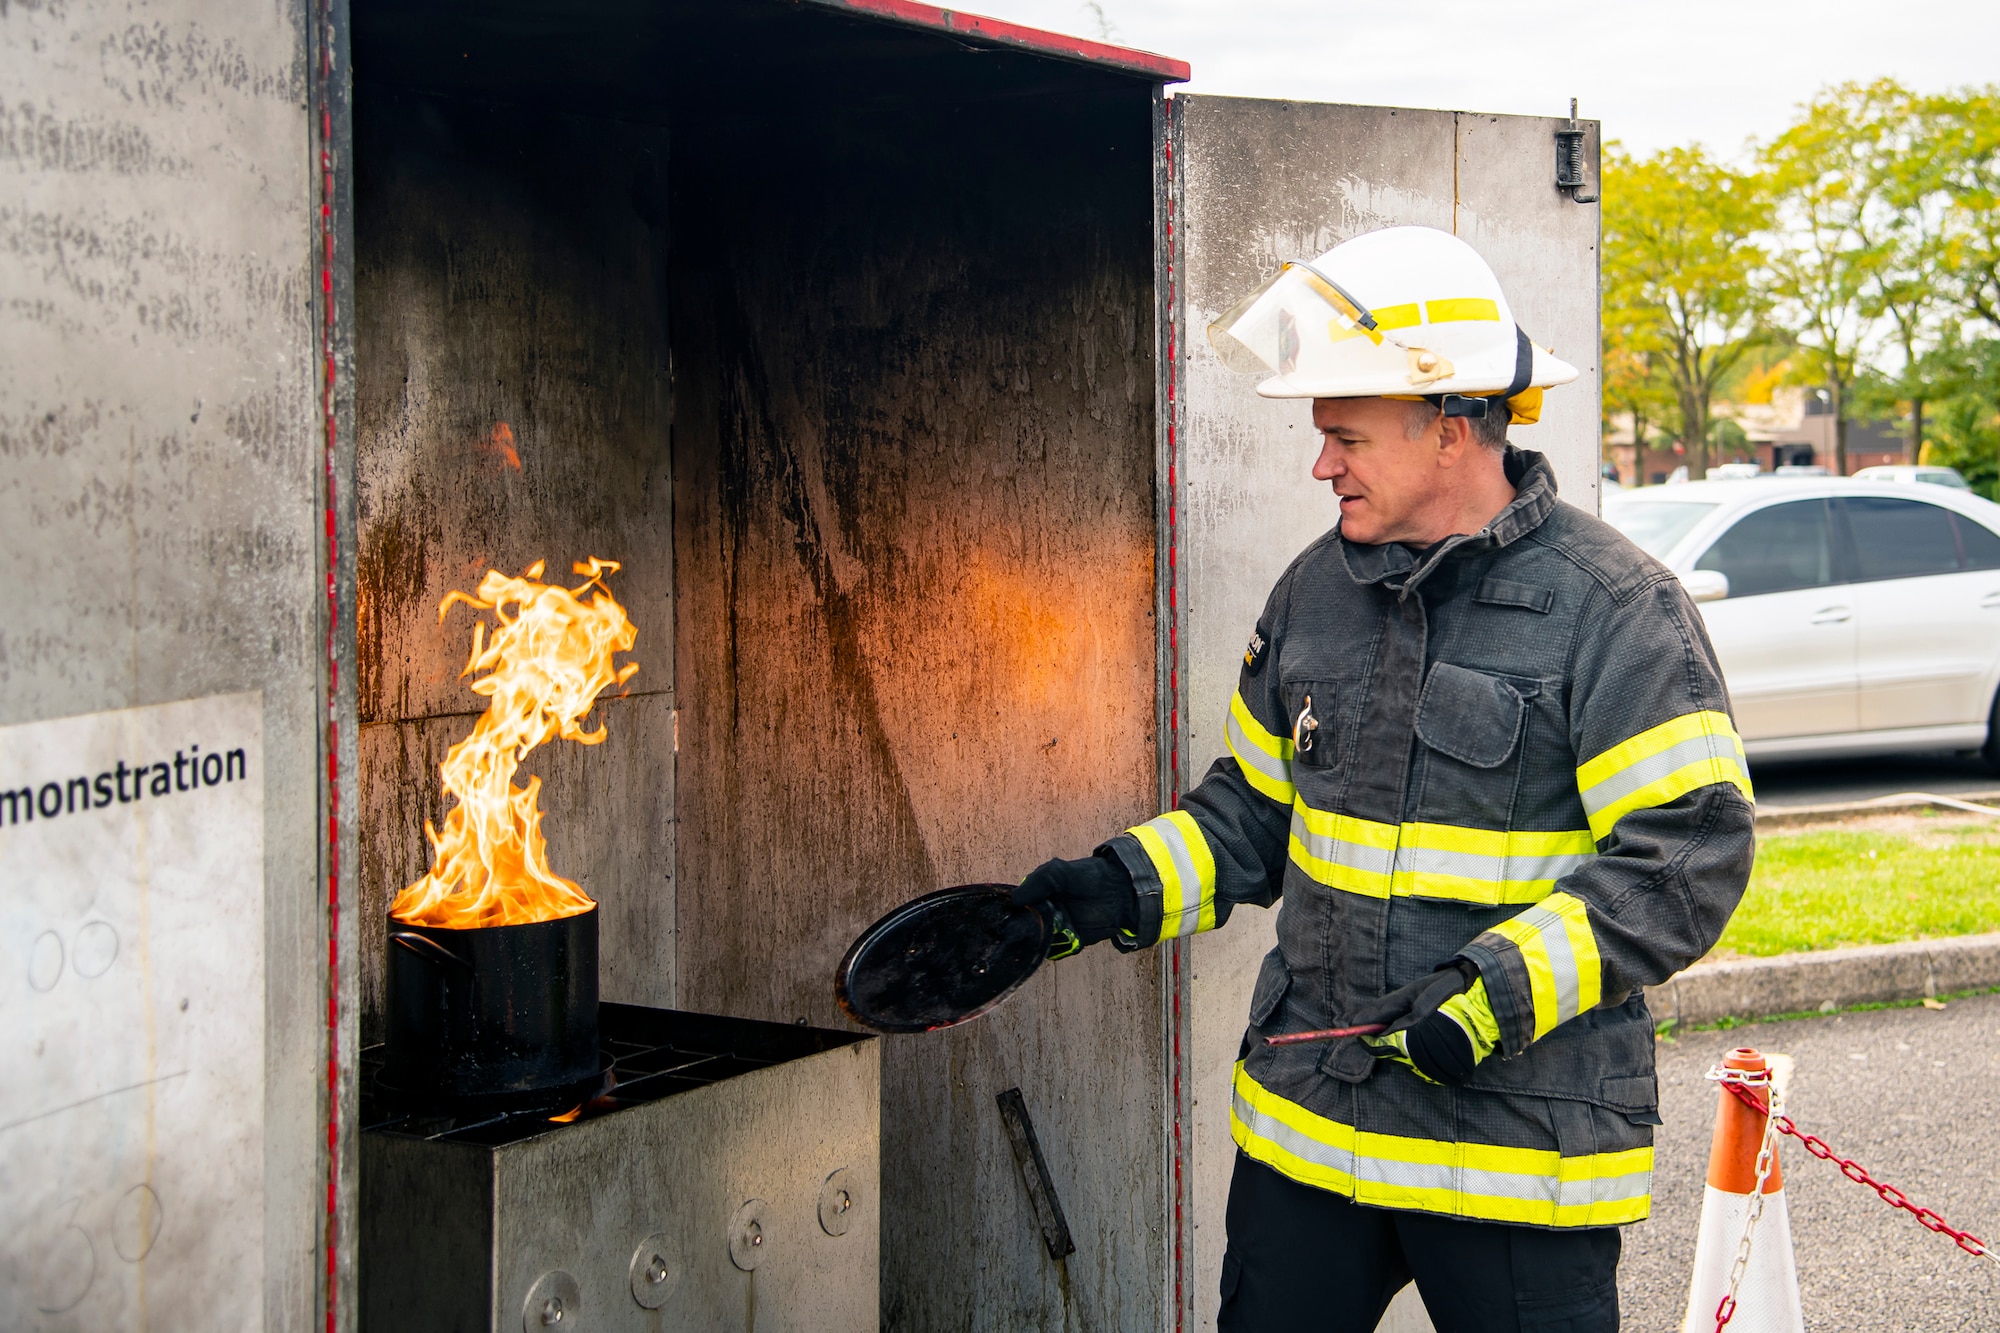 Dave Herman, 423d Civil Engineer Squadron assistant chief of fire prevention, conducts a grease fire demonstration at RAF Alconbury, England, Oct. 12, 2022. The demonstration was part of Fire Prevention Week in which firefighters from the 423d CES educated Airmen and dependents on proper fire safety habits. (U.S. Air Force photo by Staff Sgt. Eugene Oliver)